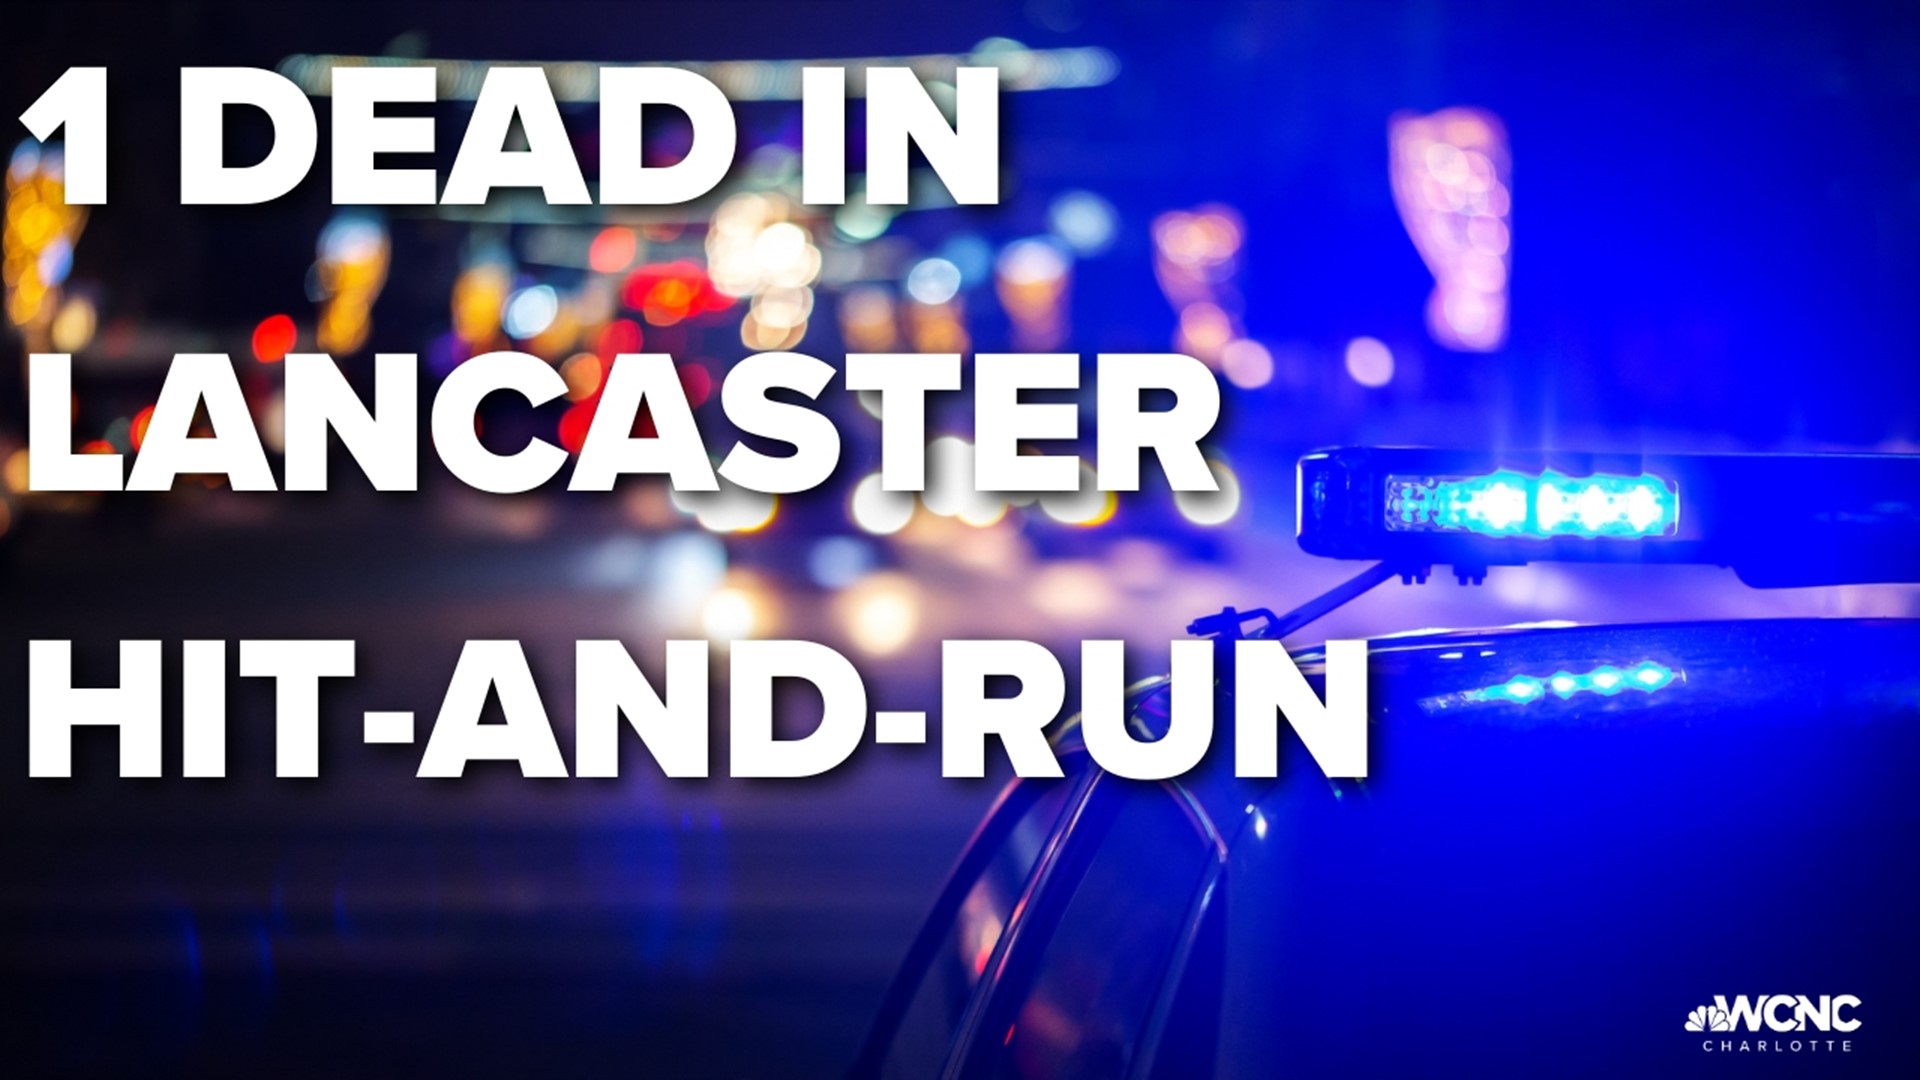 Bicyclist killed in fatal hit-and-run in Lancaster County, suspect sought